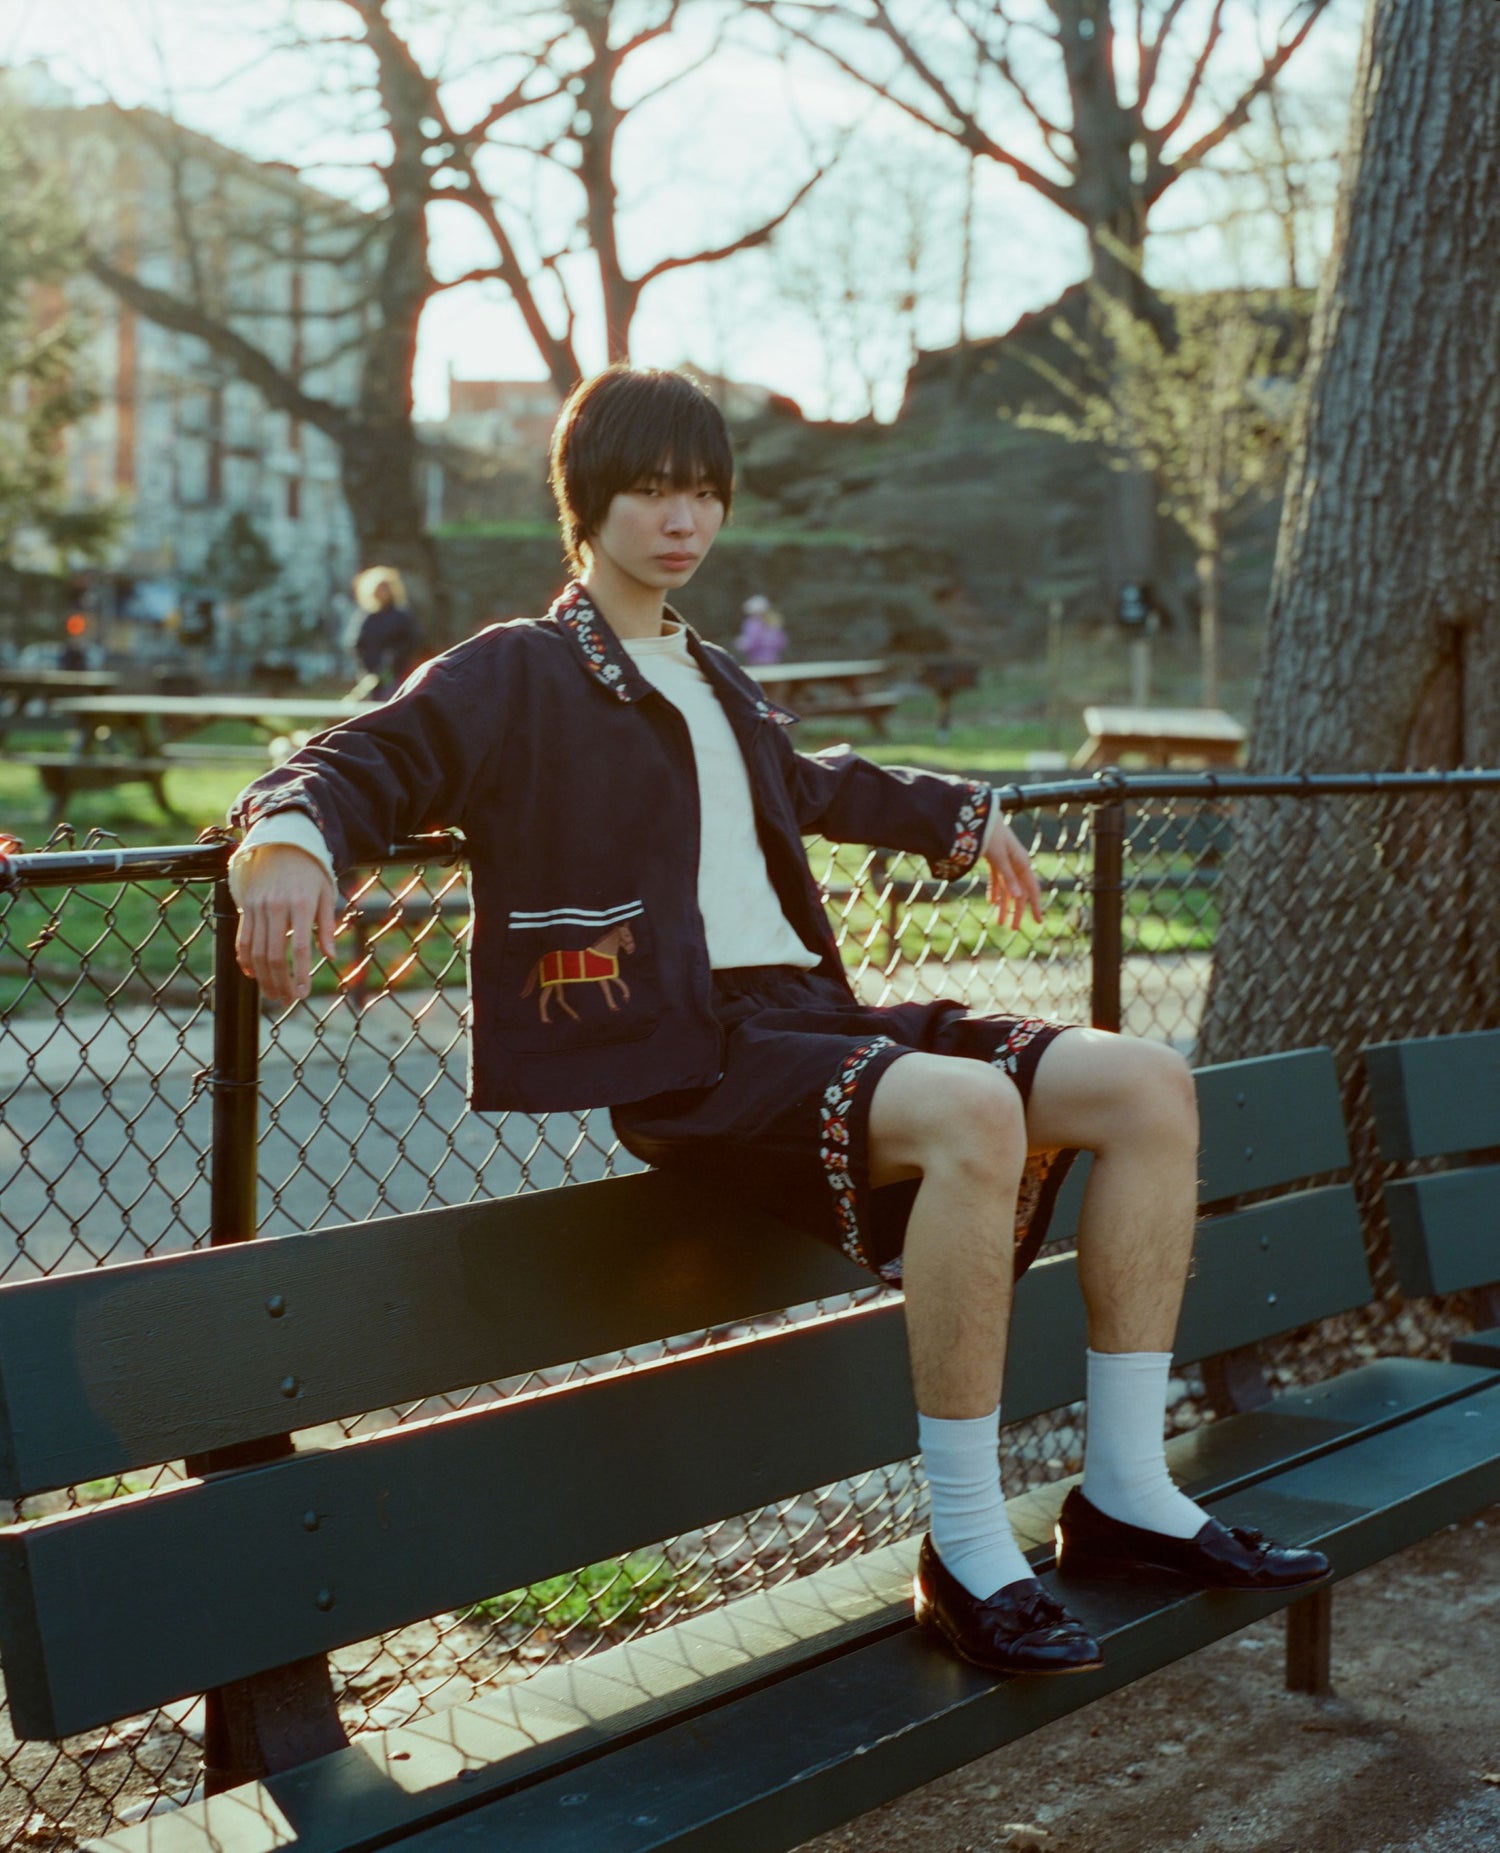 A young man sitting on a park bench, wearing a Found Horse Equine Work Jacket and shorts, with a relaxed posture and a slight smile.